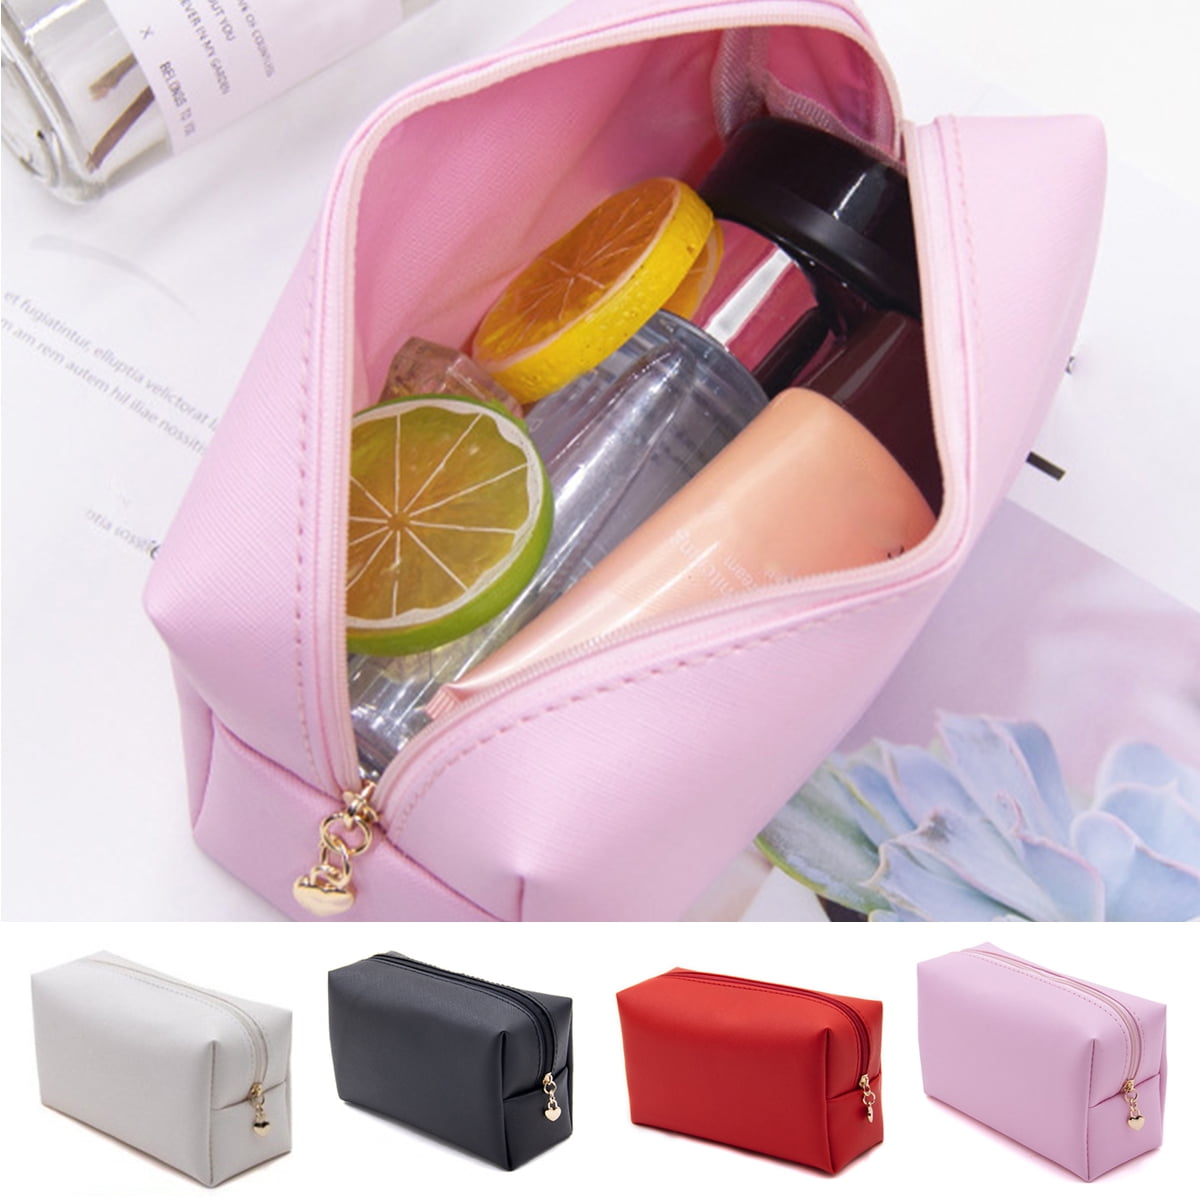  Londo Genuine Leather Makeup Bag Cosmetic Pouch